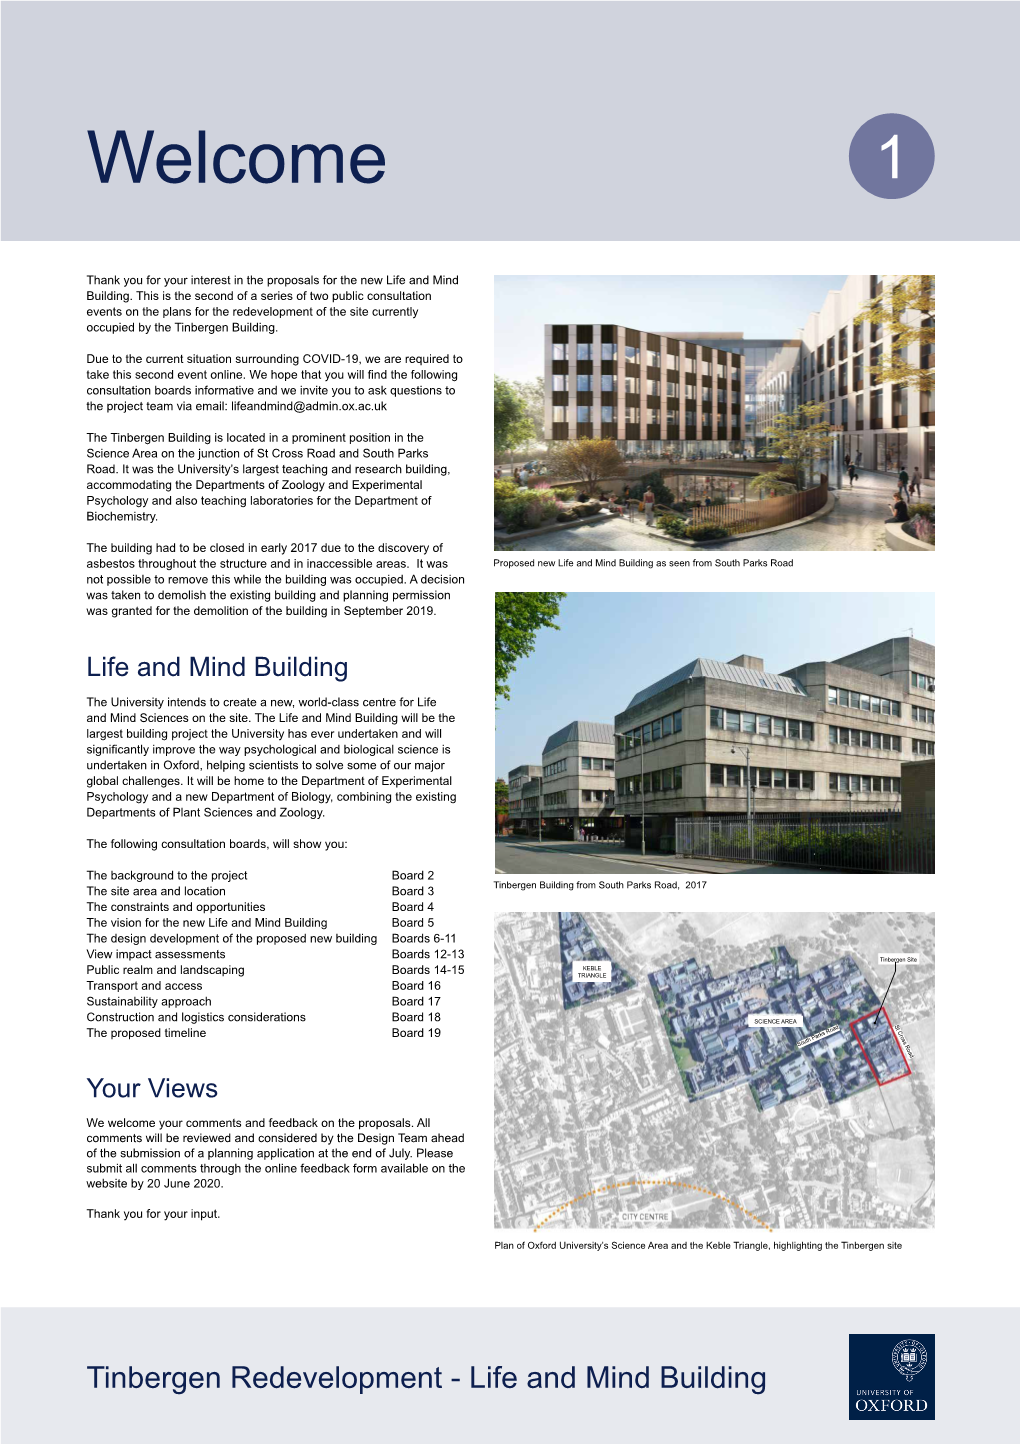 Tinbergen Redevelopment - Life and Mind Building Project Background 2